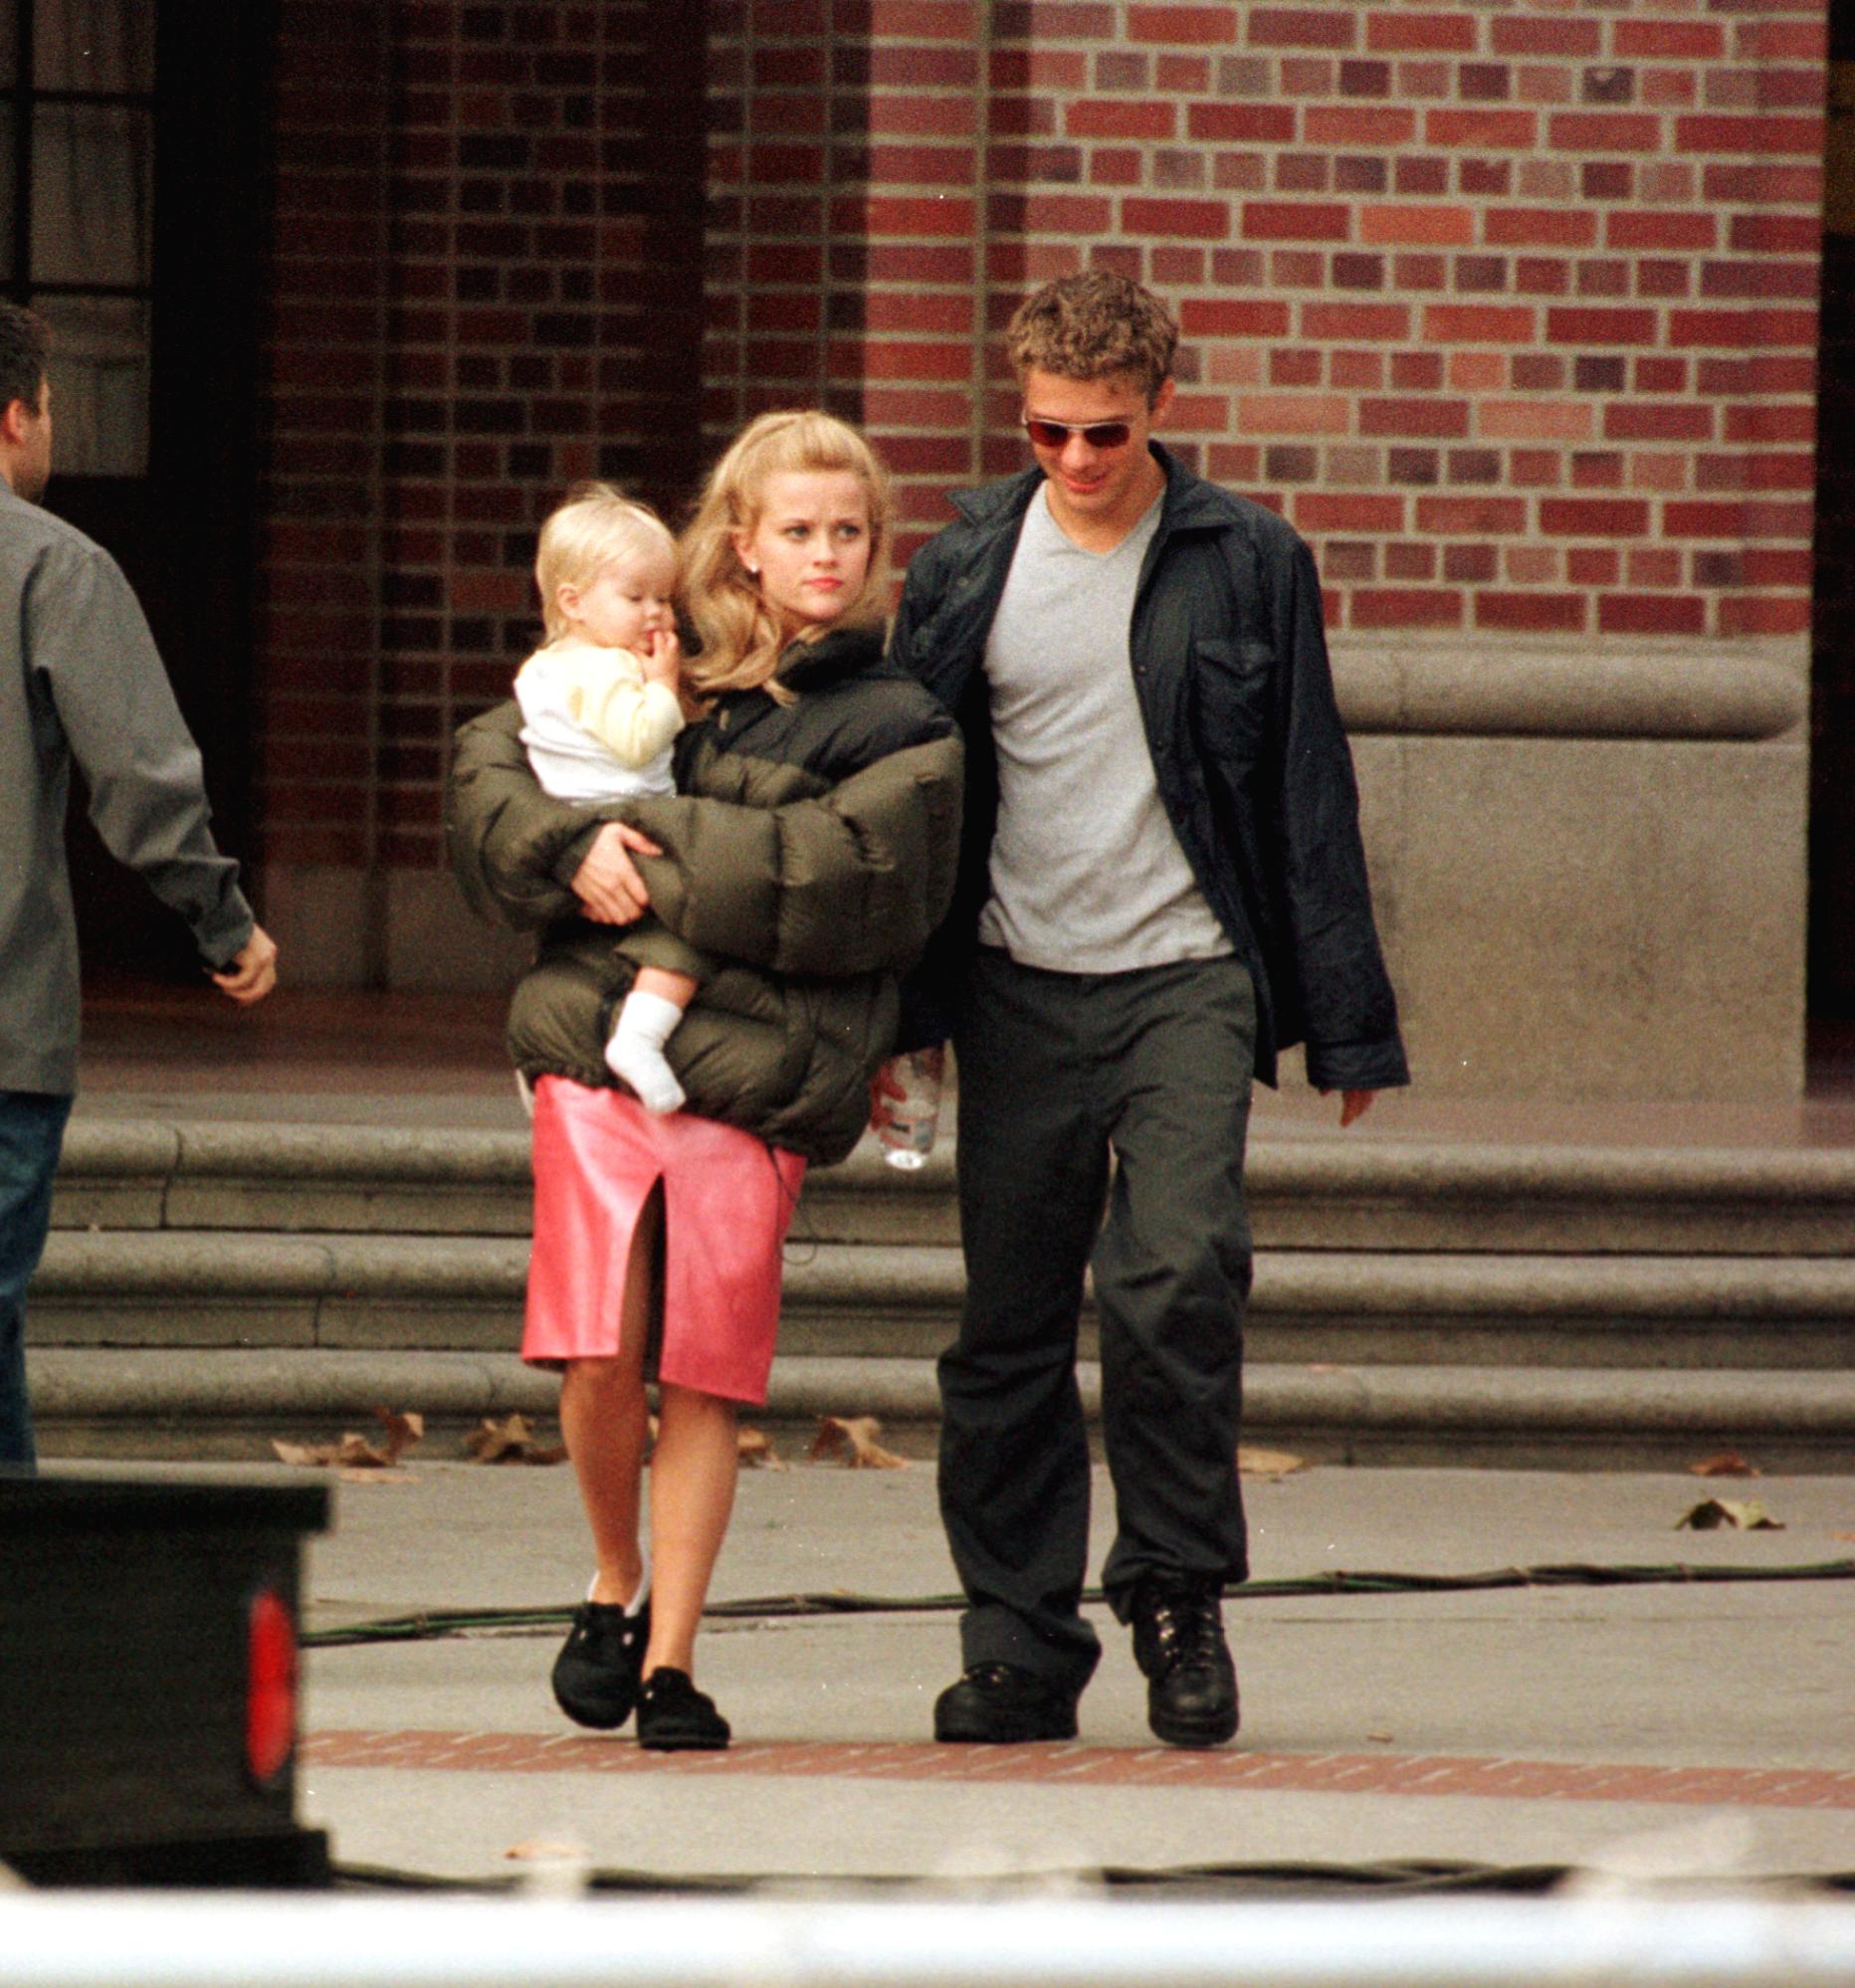 Reese Witherspoon is visited by her husband Ryan Phillippe and their child on the set of "Legally Blonde" on October 21, 2000, in Los Angeles.| Source: Getty Image